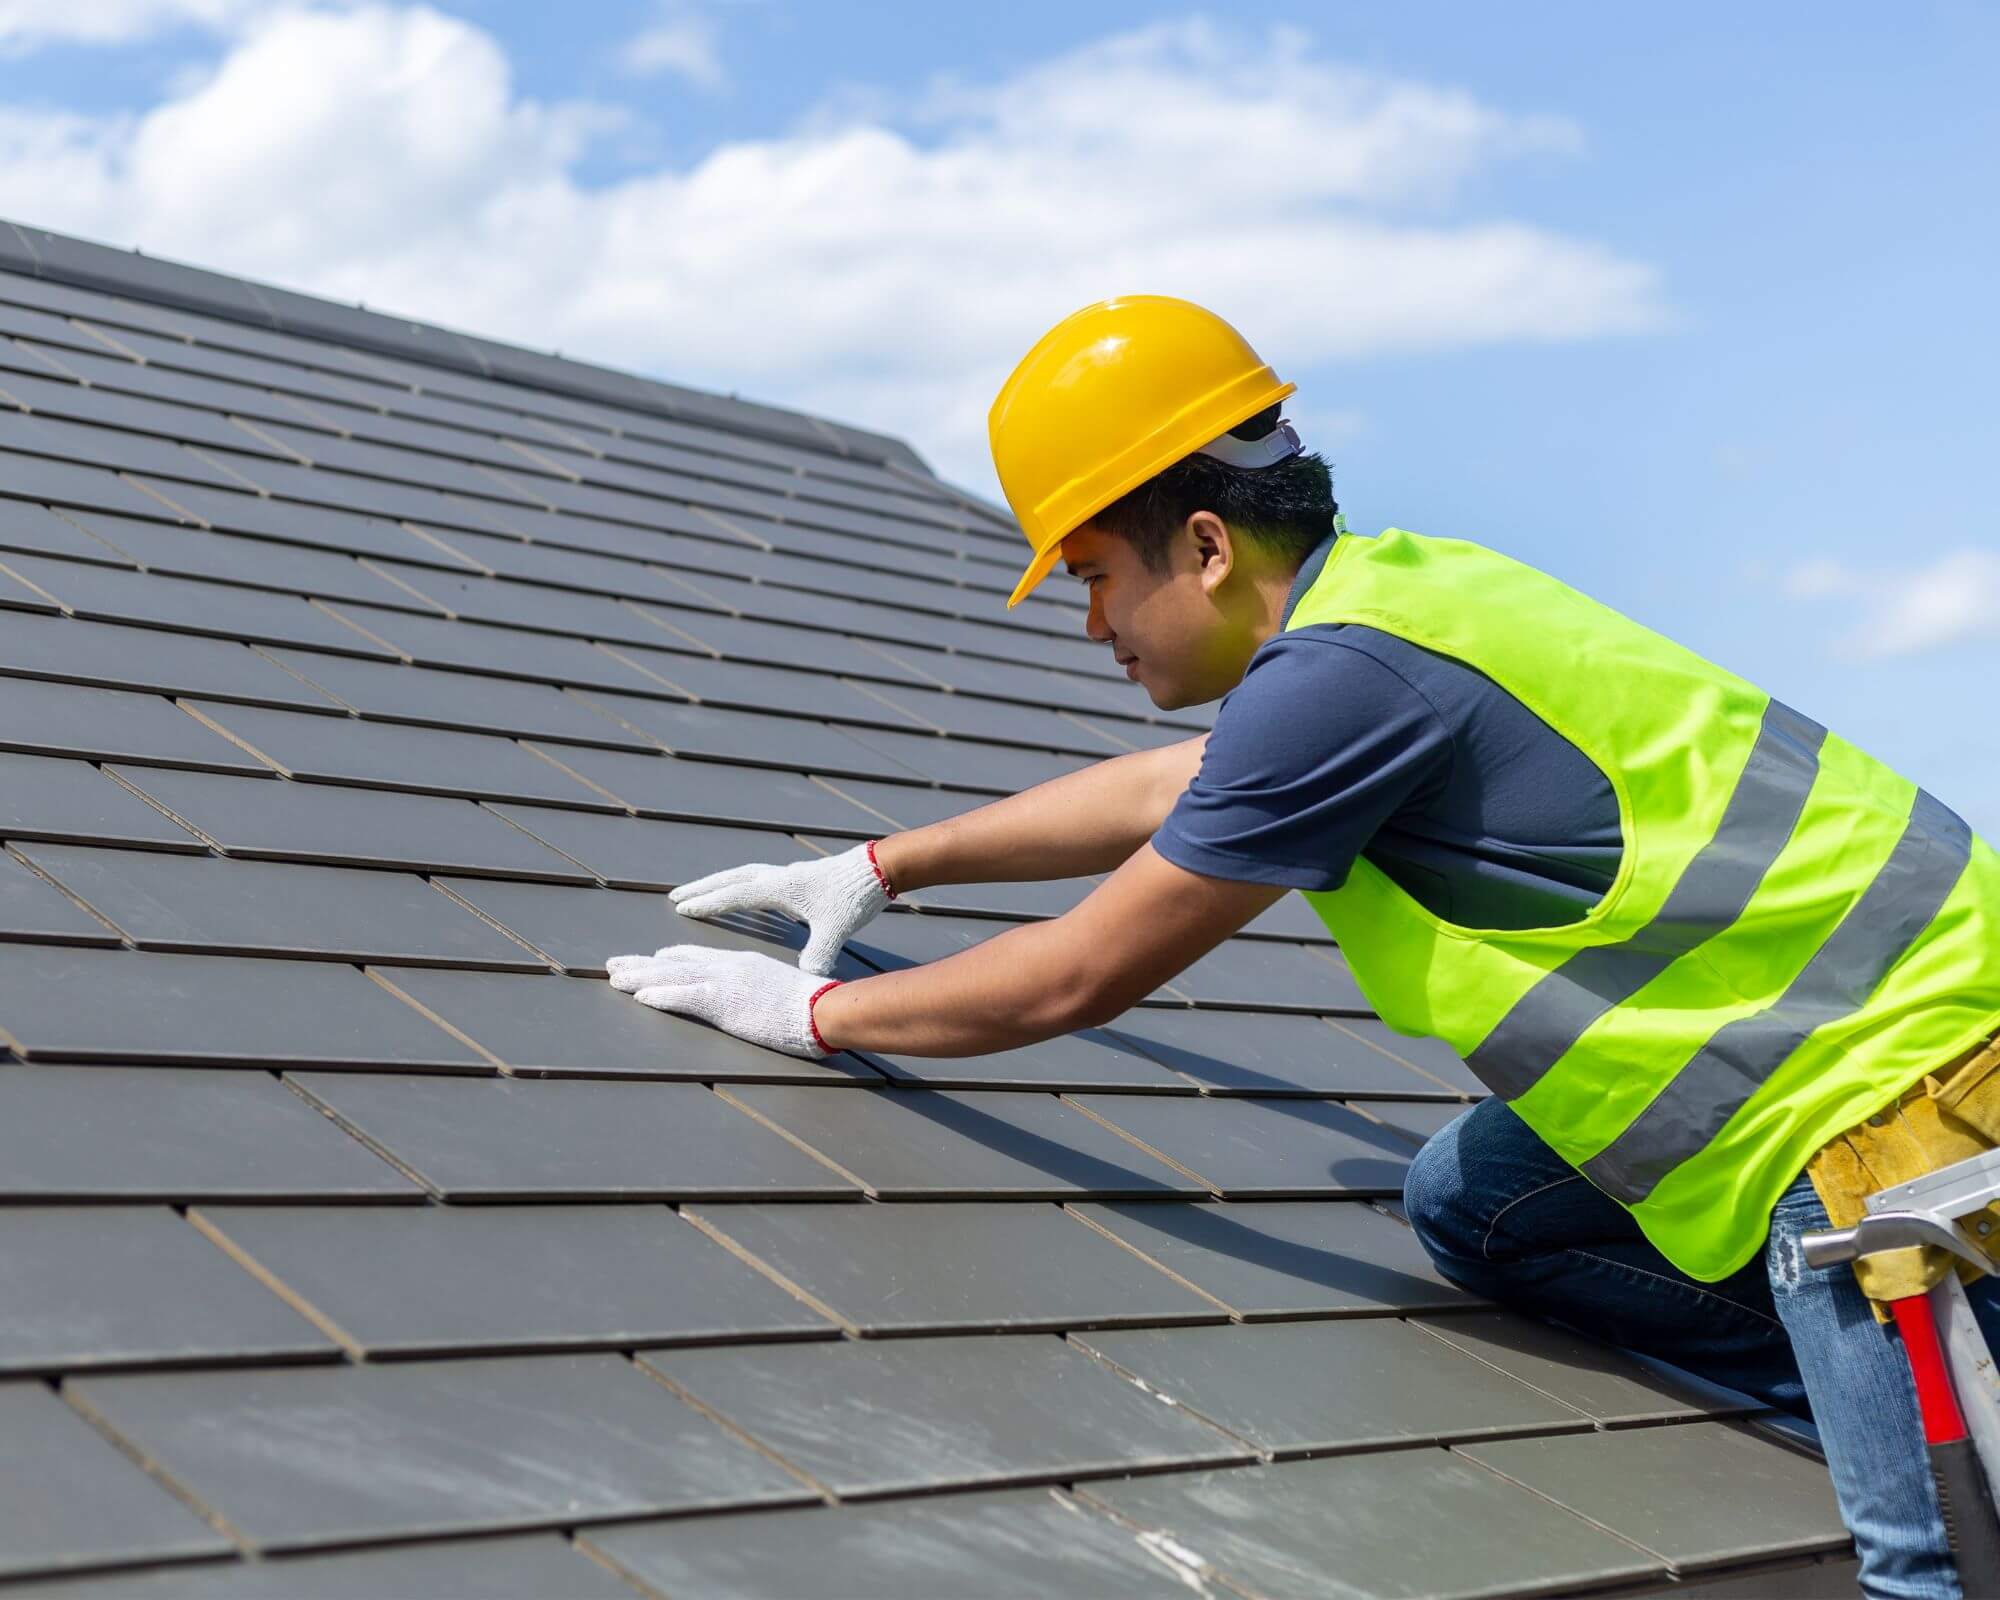 Palm Coast Roofing Service